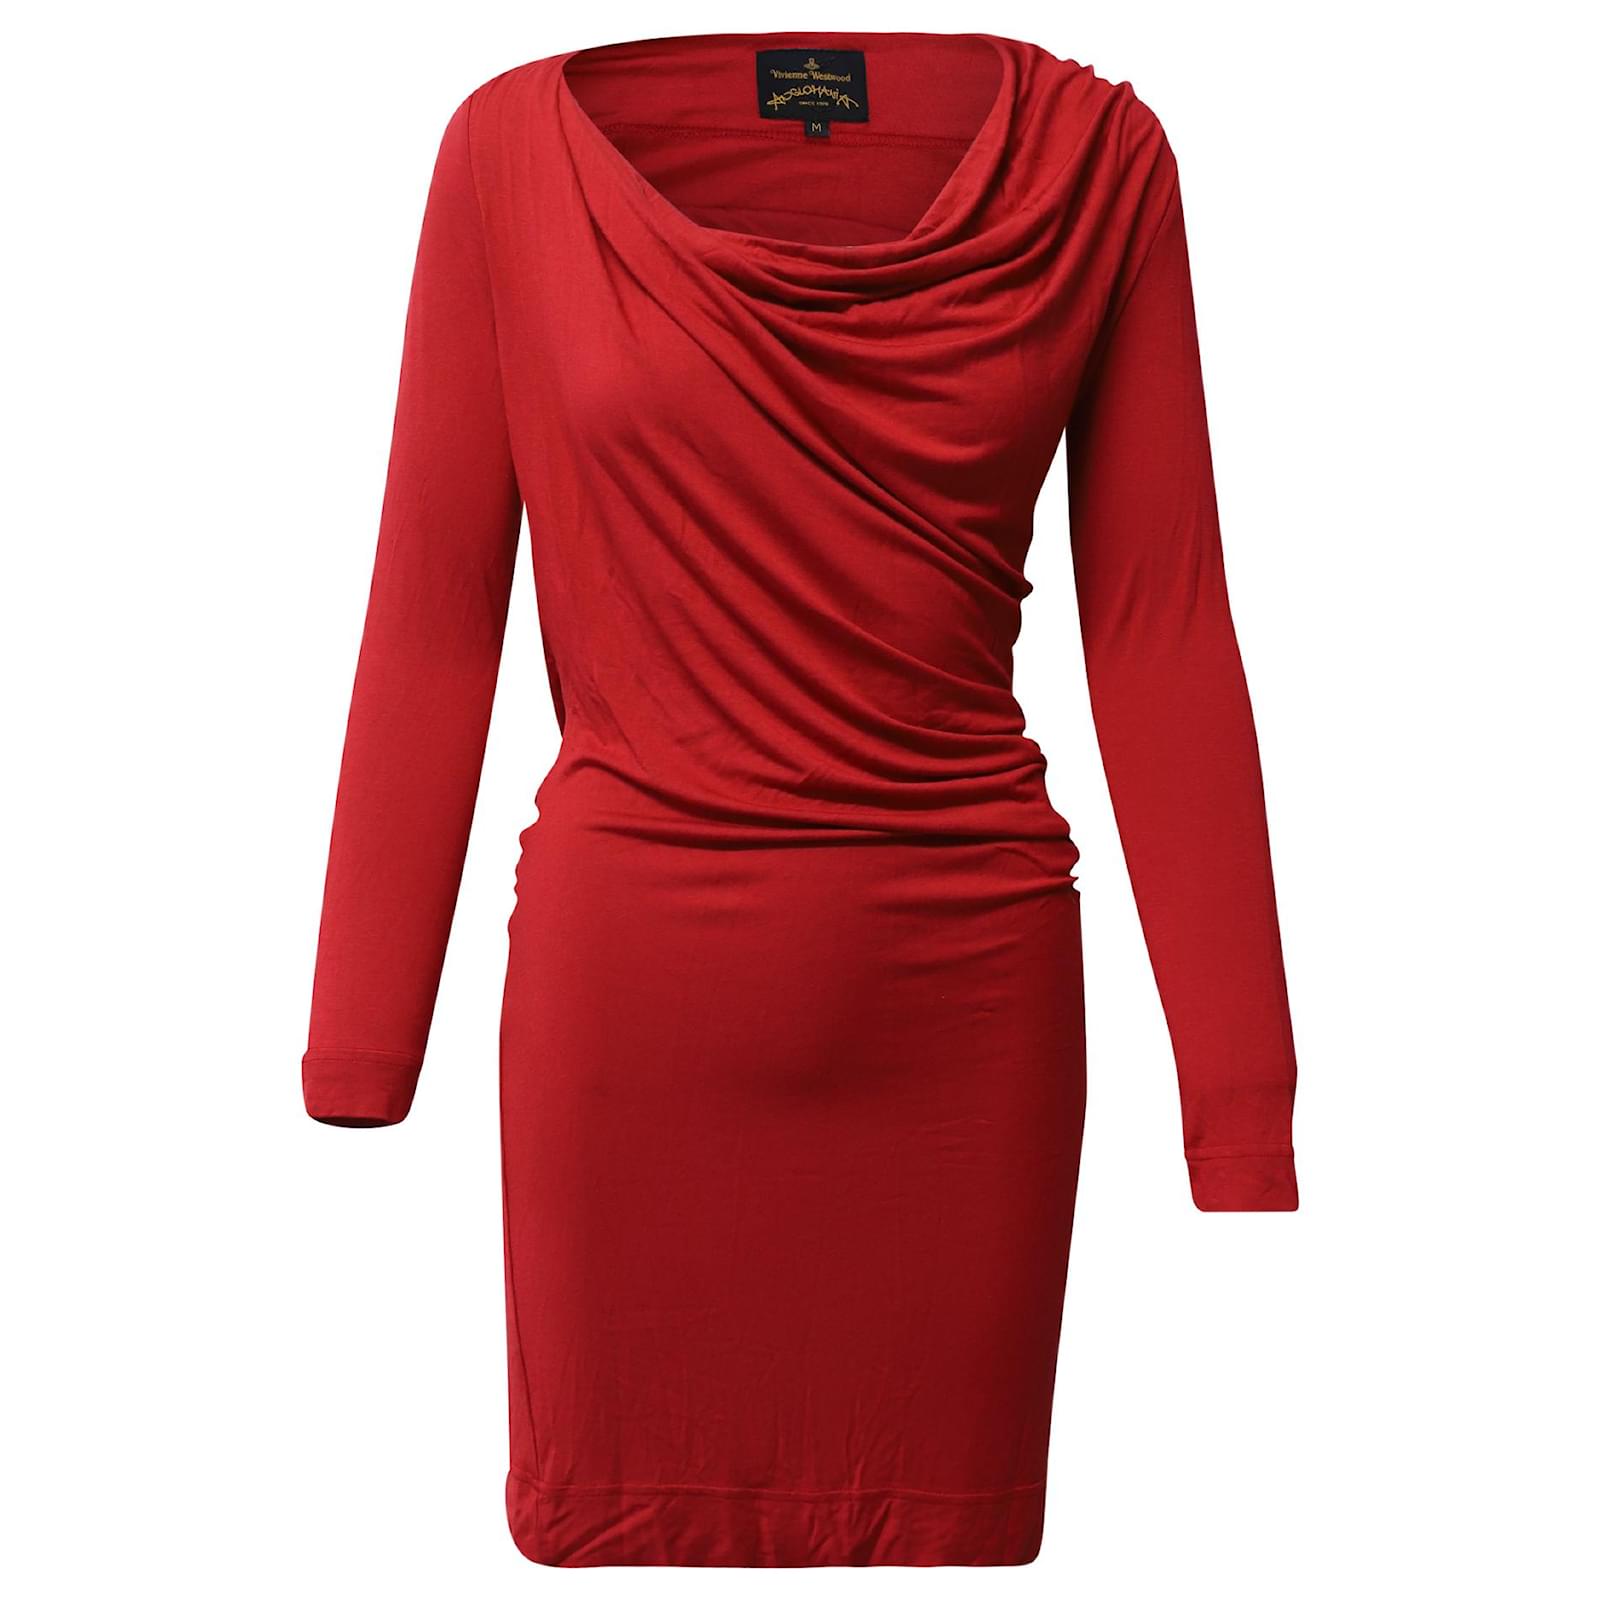 Vivienne Westwood Anglomania Draped Long Sleeve Dress in Red